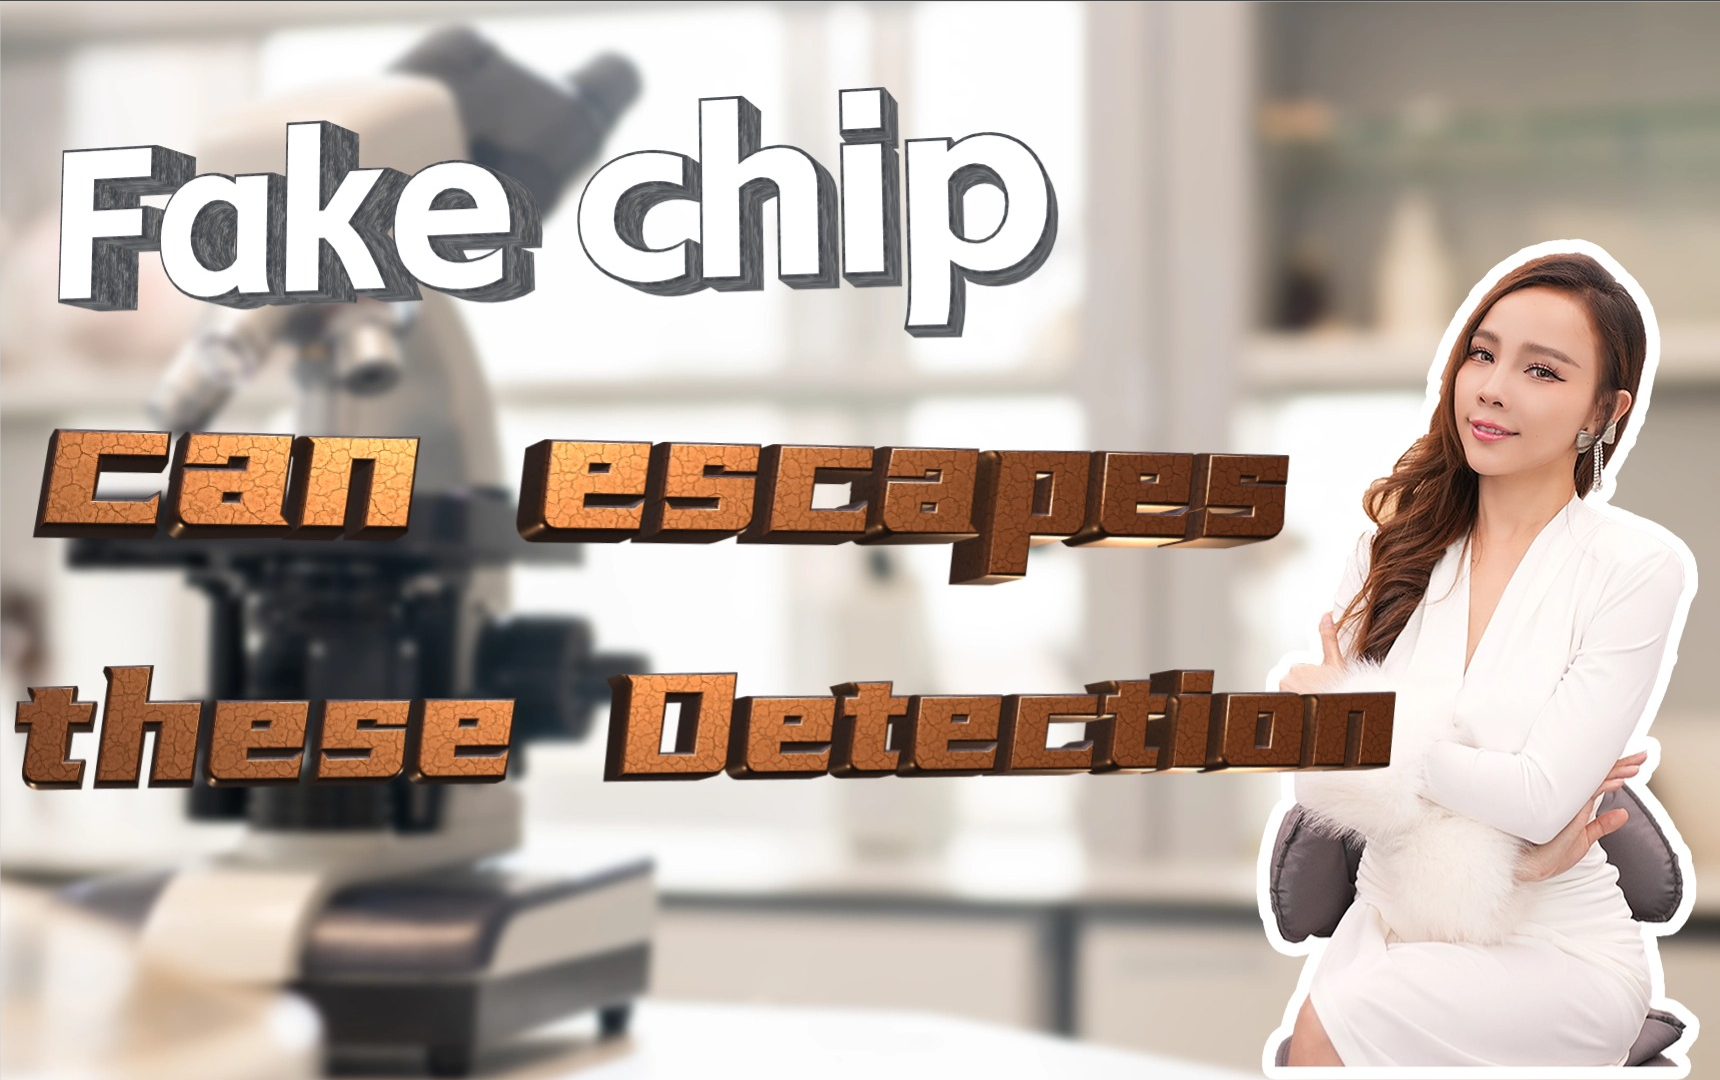 Don’t waste your time. This common detection method cannot help you identify fake chips.